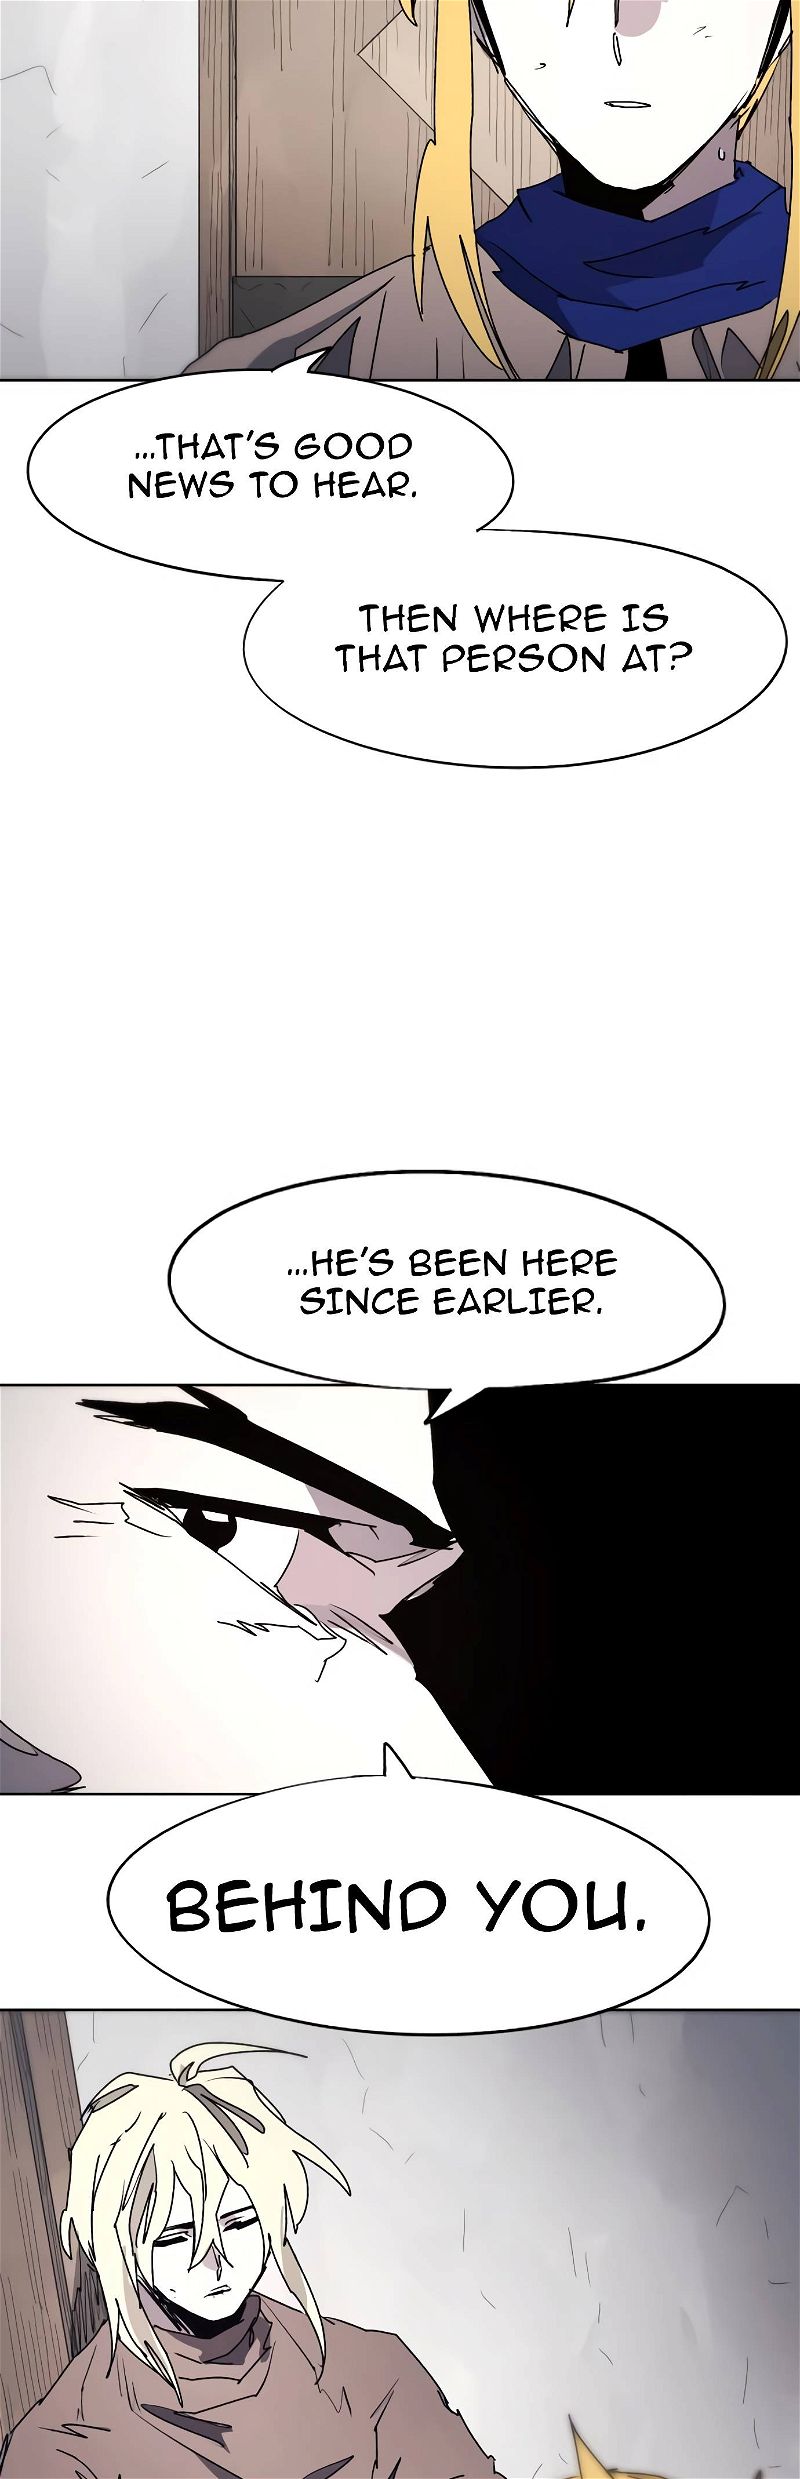 The Knight of Embers Chapter 87 page 17